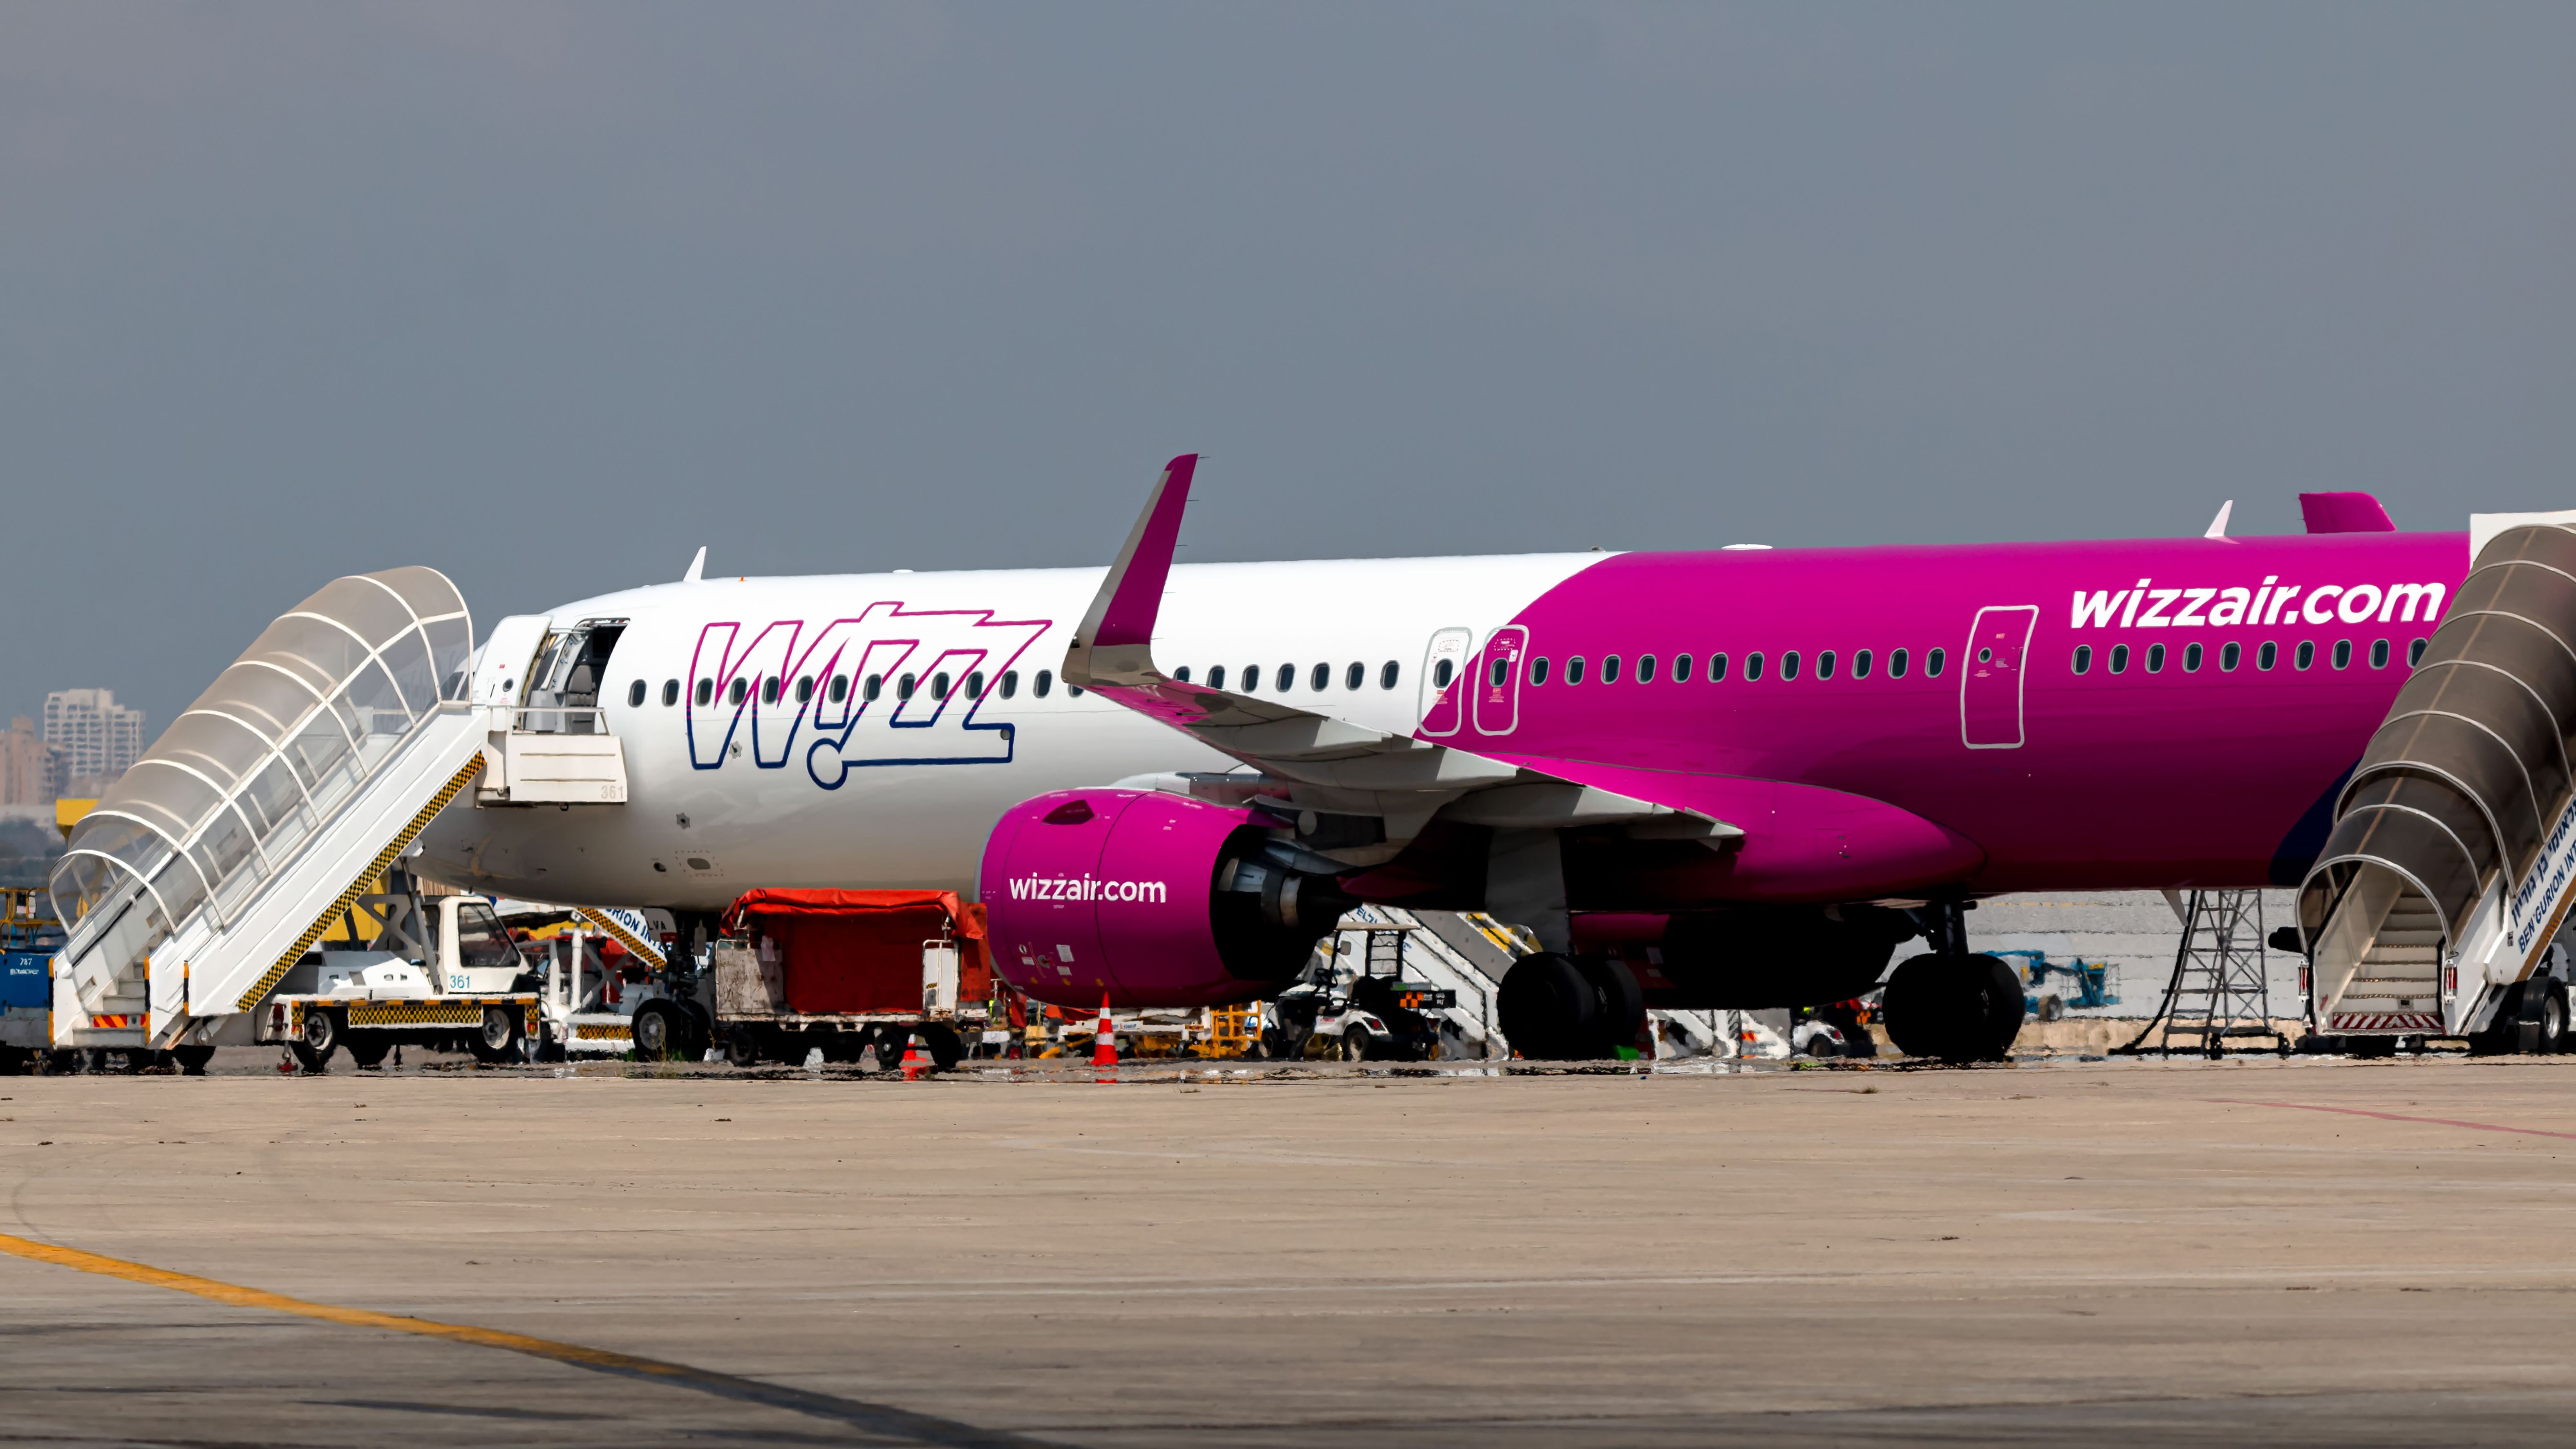 Wizz Air A321neo on the tarmac.